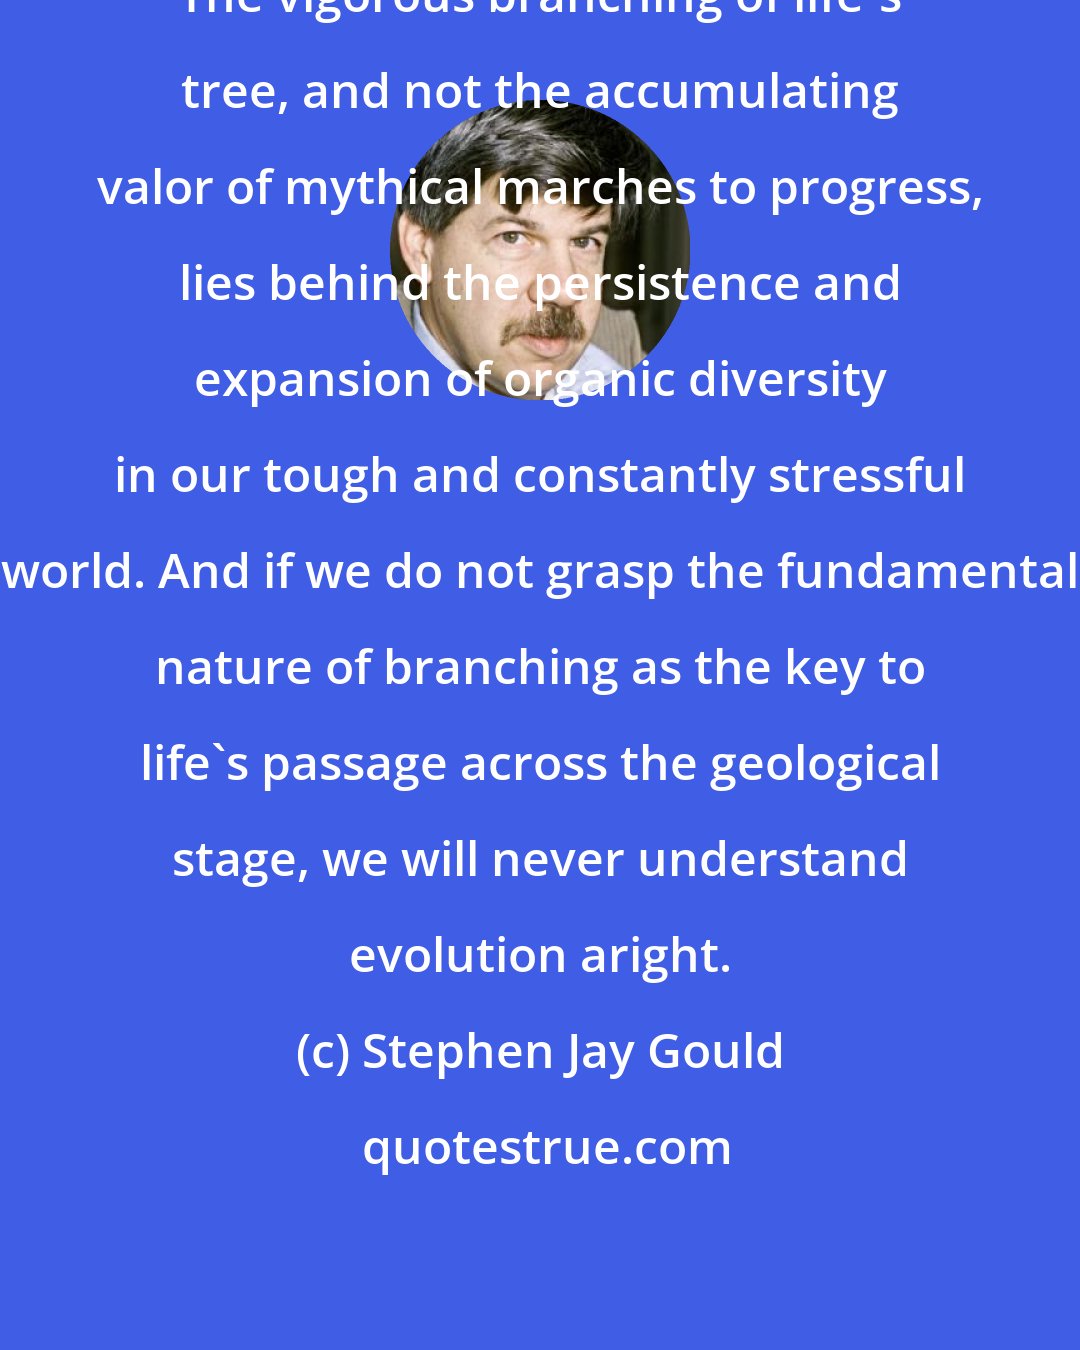 Stephen Jay Gould: The vigorous branching of life's tree, and not the accumulating valor of mythical marches to progress, lies behind the persistence and expansion of organic diversity in our tough and constantly stressful world. And if we do not grasp the fundamental nature of branching as the key to life's passage across the geological stage, we will never understand evolution aright.